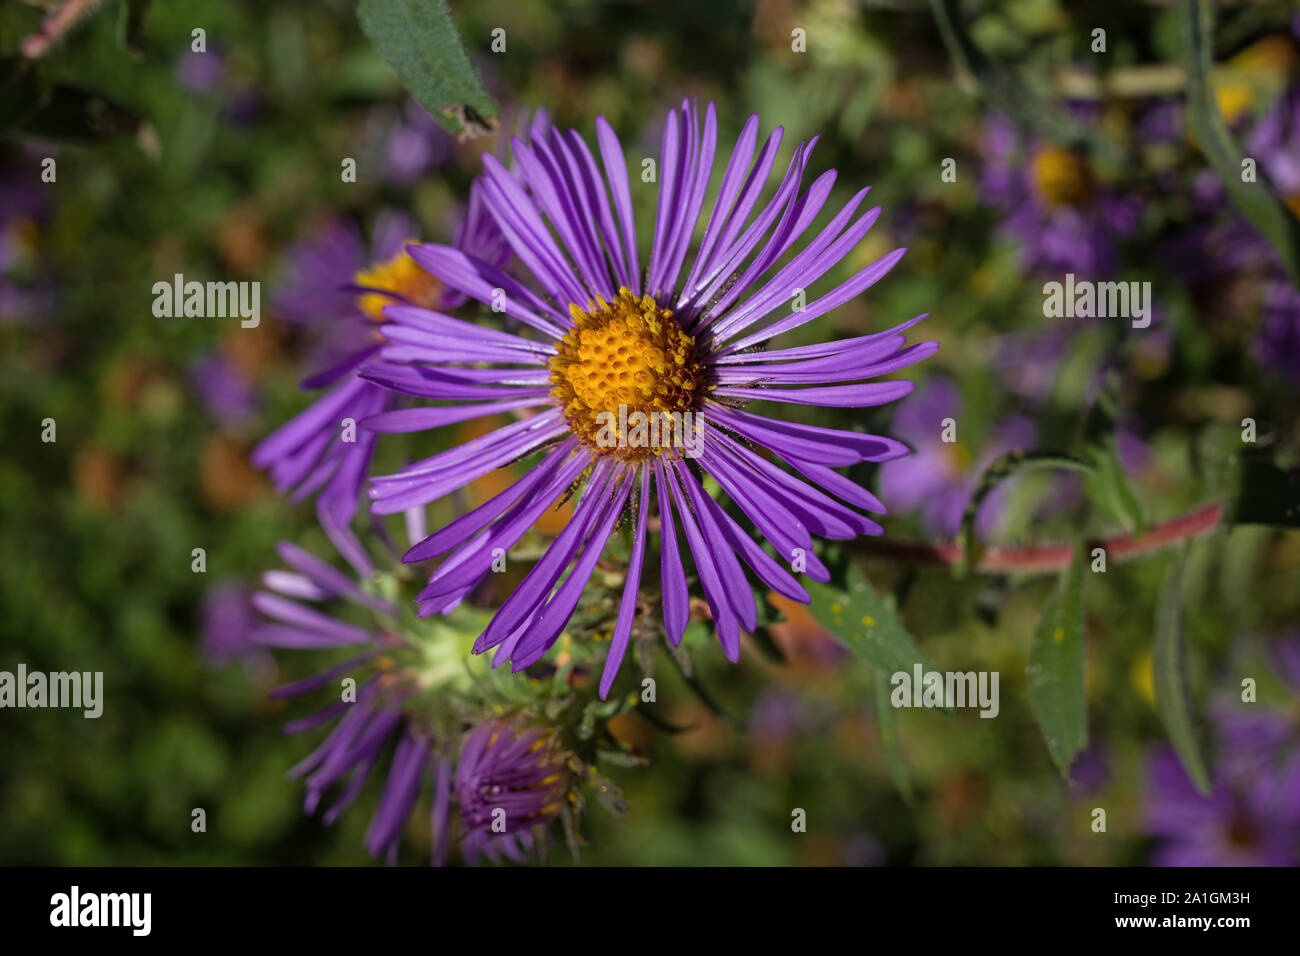 New England aster in an early autumn garden. Known as Symphyotrichum novae-angliae, hairy Michaelmas-daisy, or Michaelmas daisy. Stock Photo